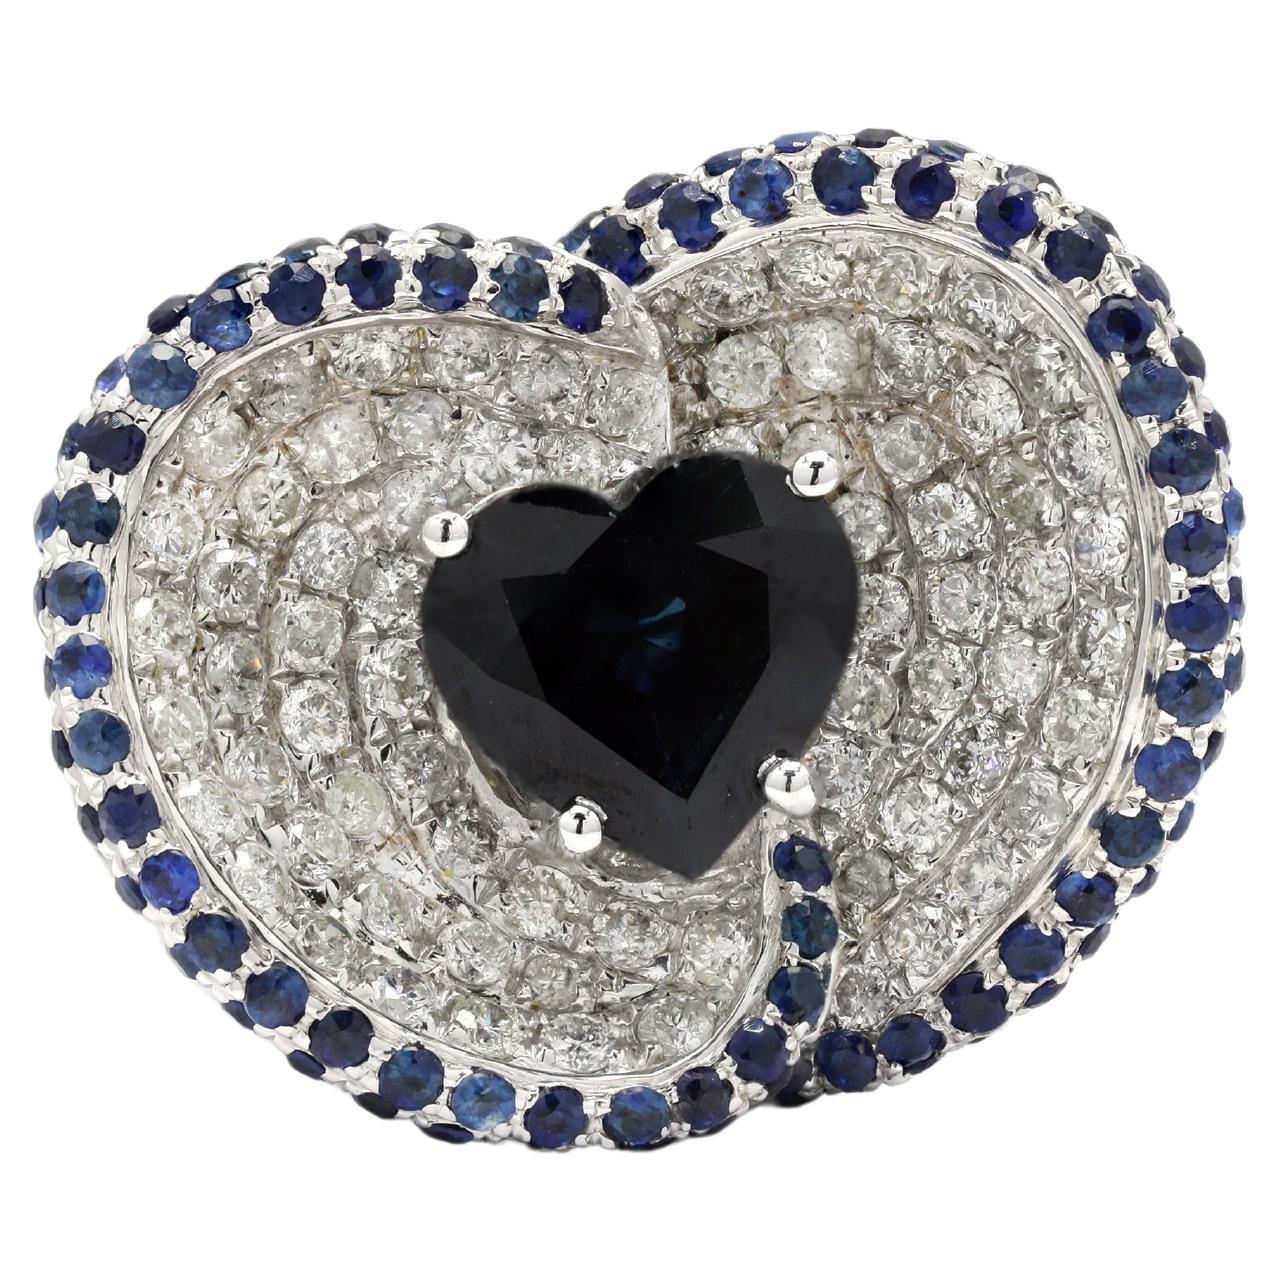 3.35 Carat Heart Cut Blue Sapphire and Diamond Unique Ring in 14K White Gold